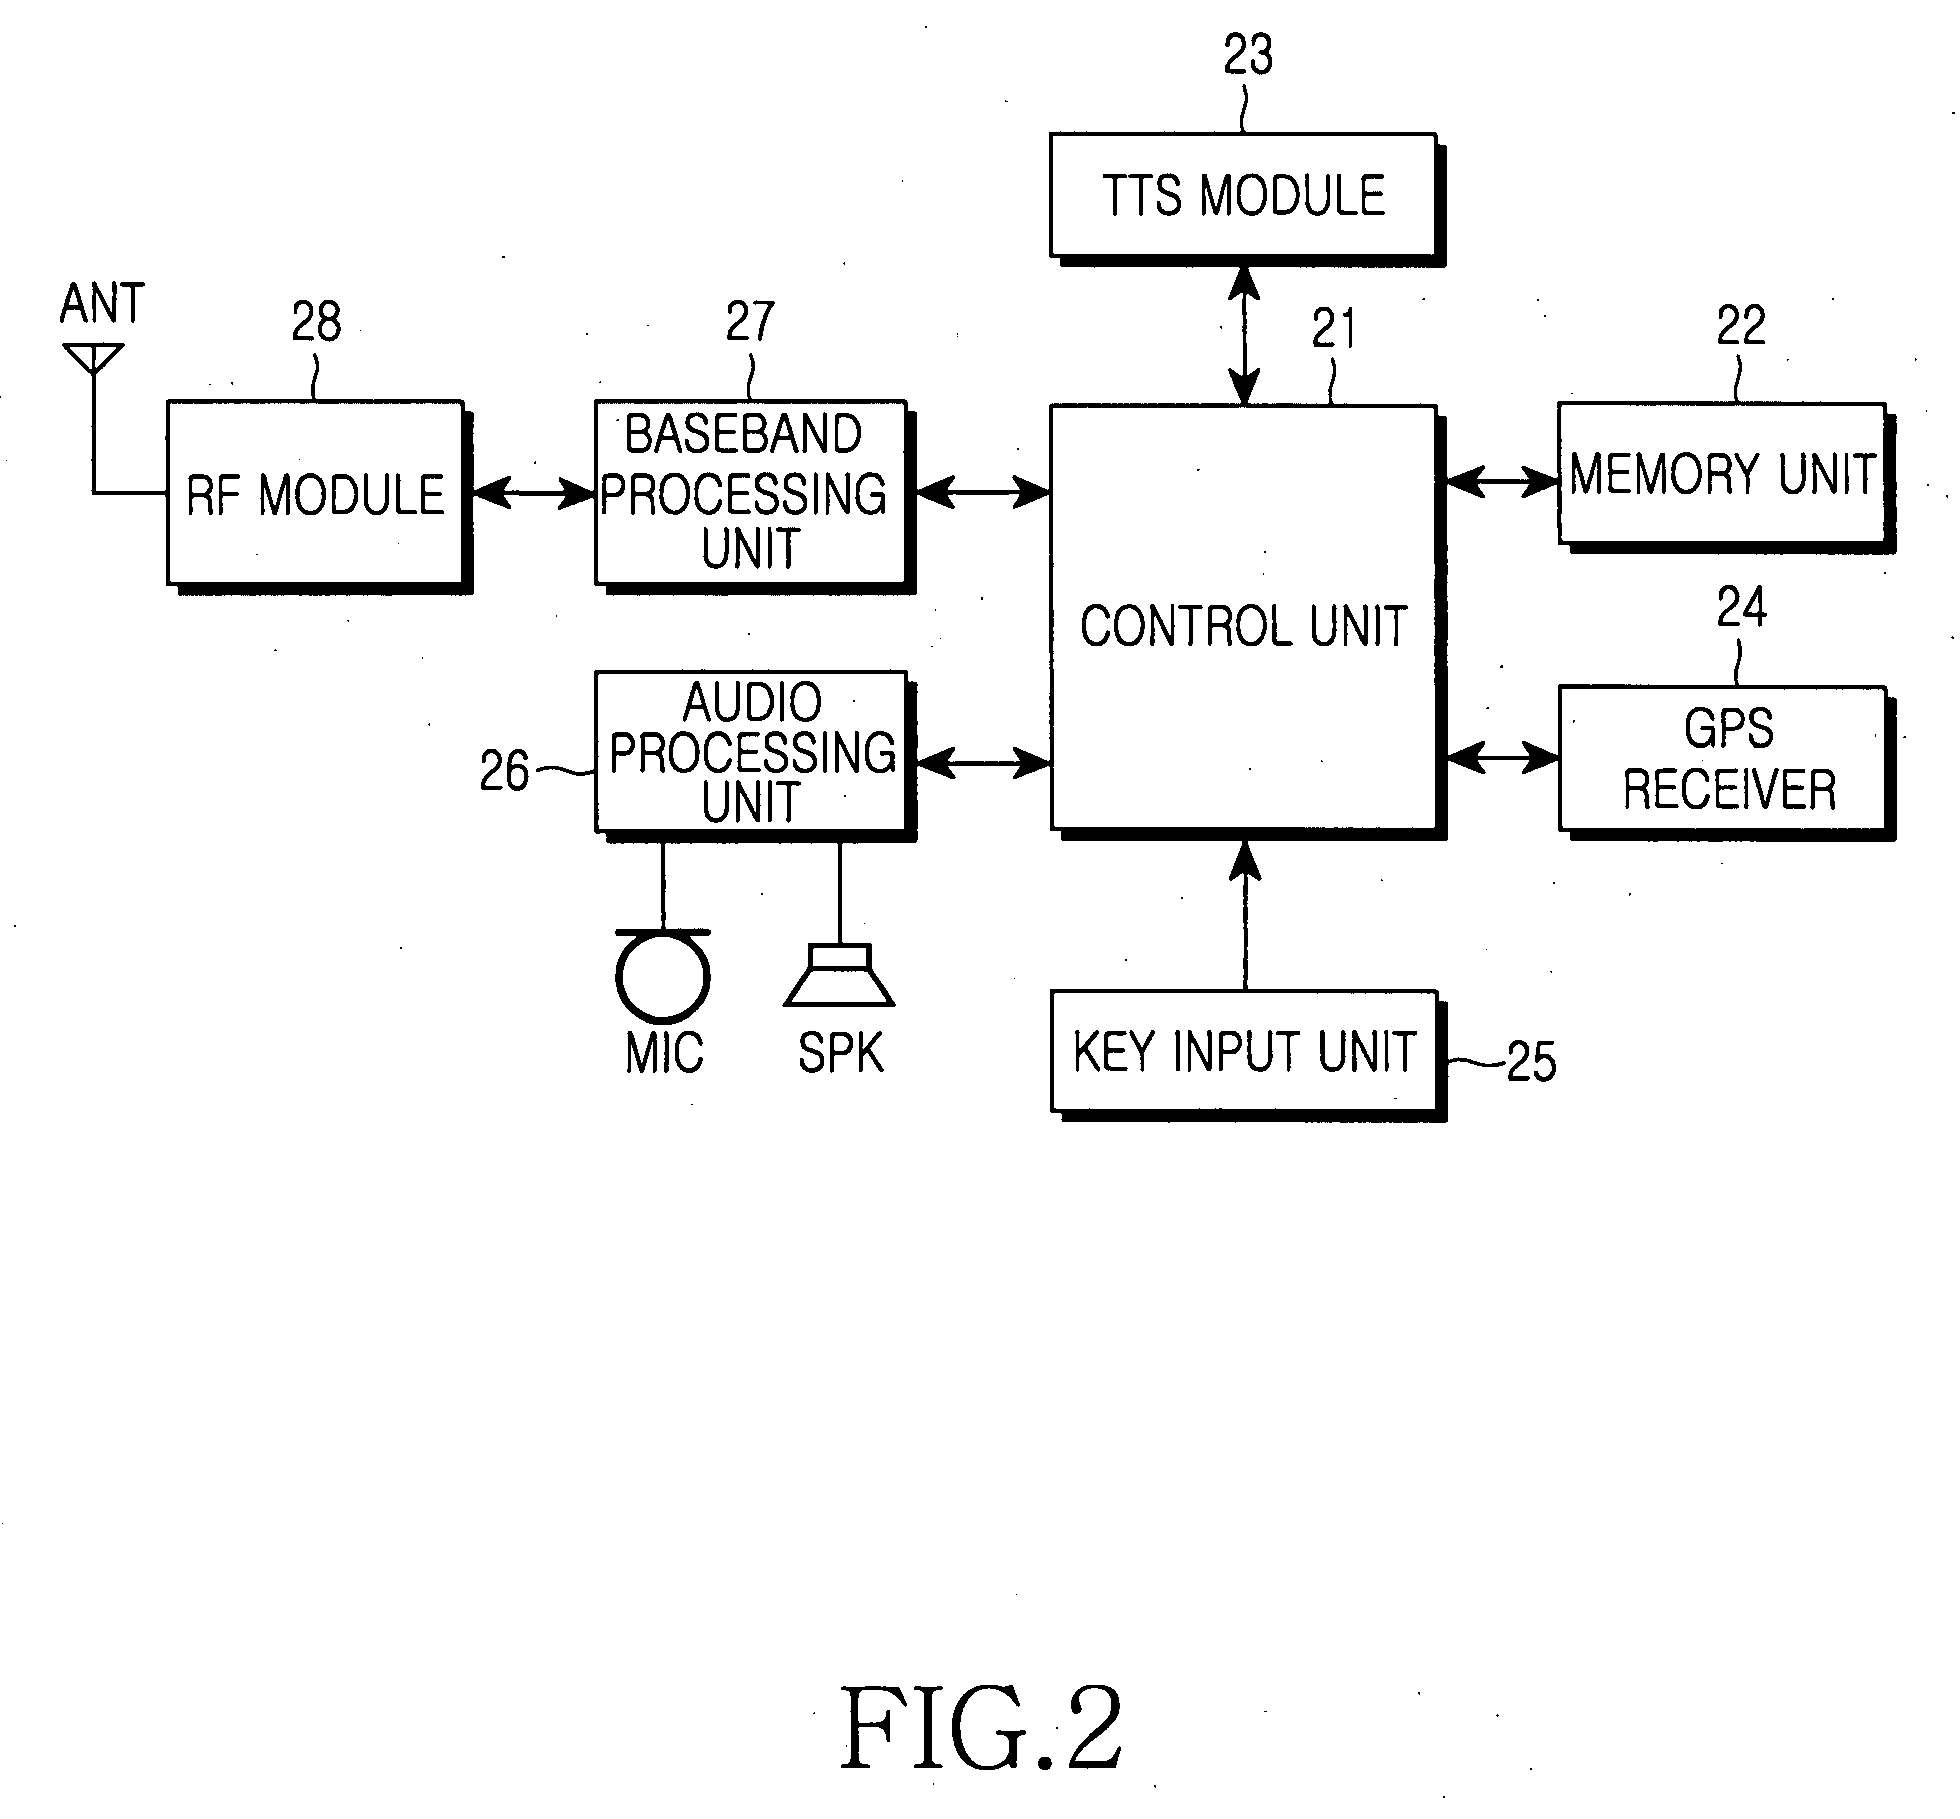 Method and apparatus for making an emergency call using a mobile communication terminal